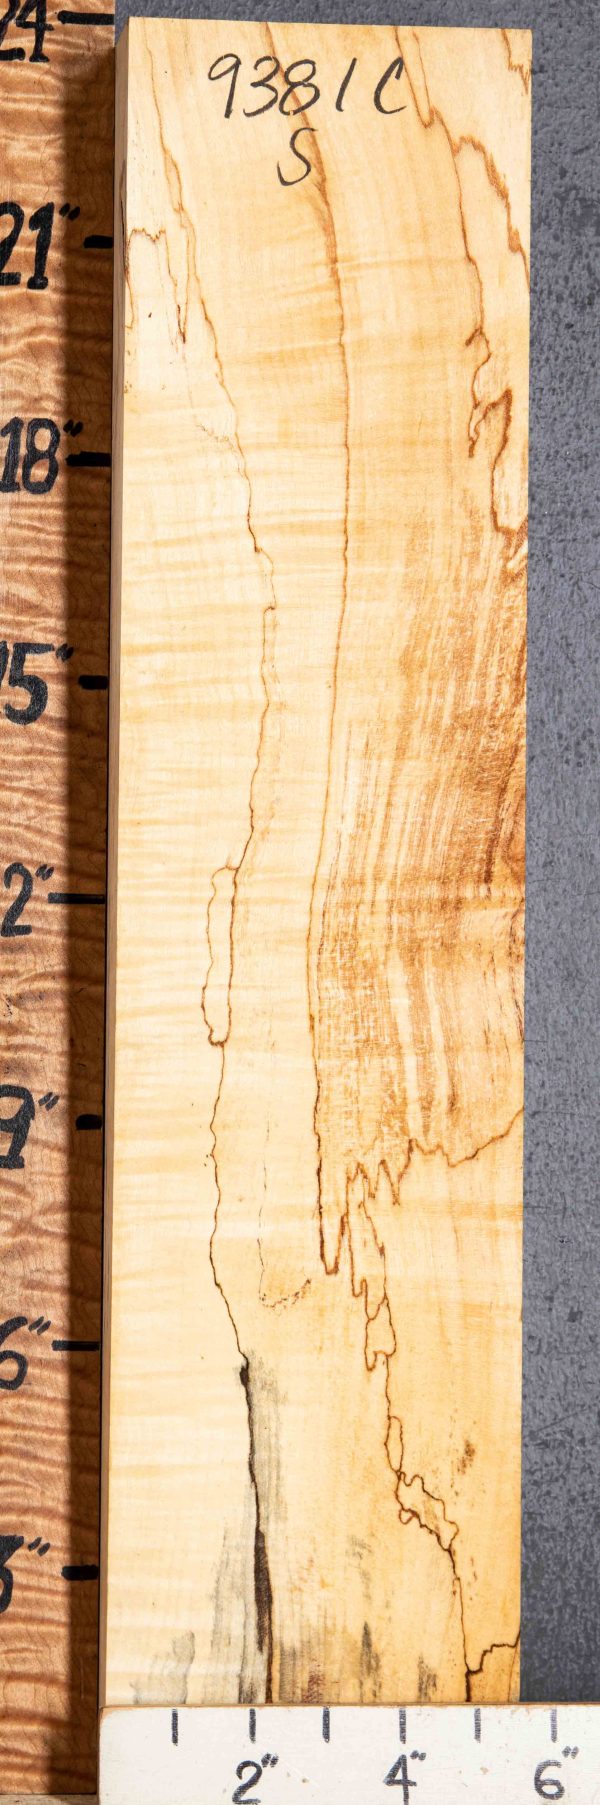 5A Spalted Maple Block 5"1/2 X 23" X 2"1/2 (NWT-9381C)